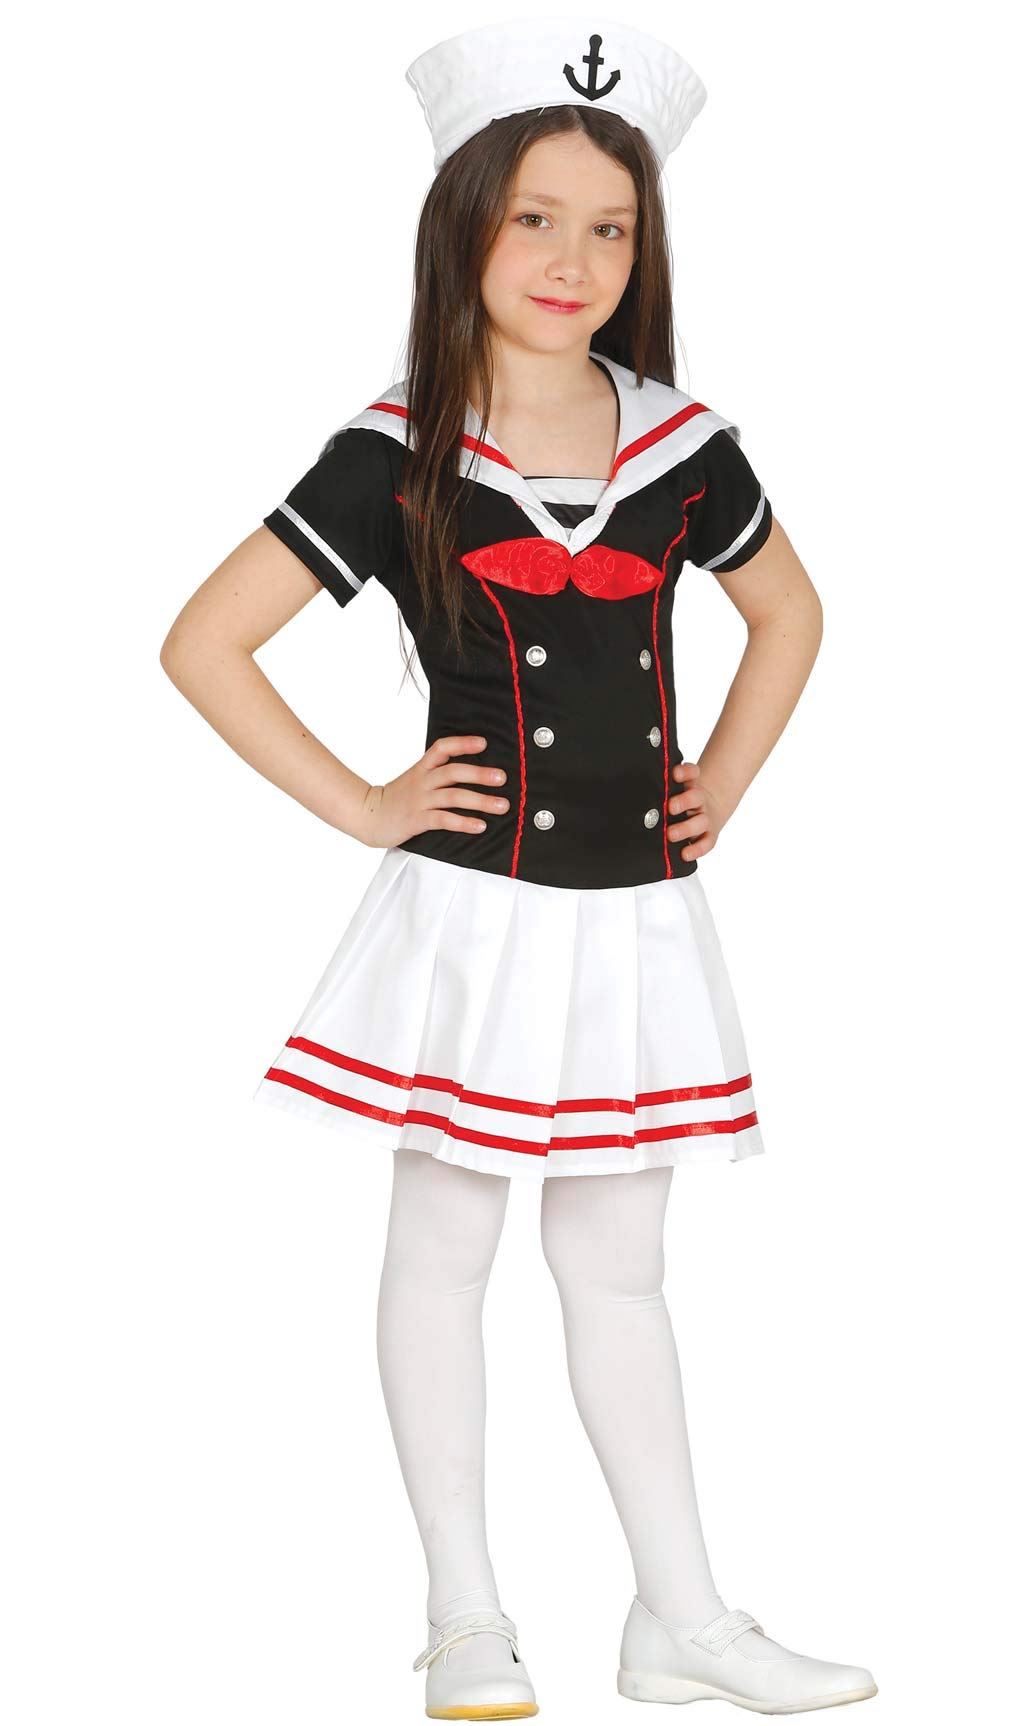 Child Carnival Costumes Sailor Baby Fancy Dress - 5-6 Years